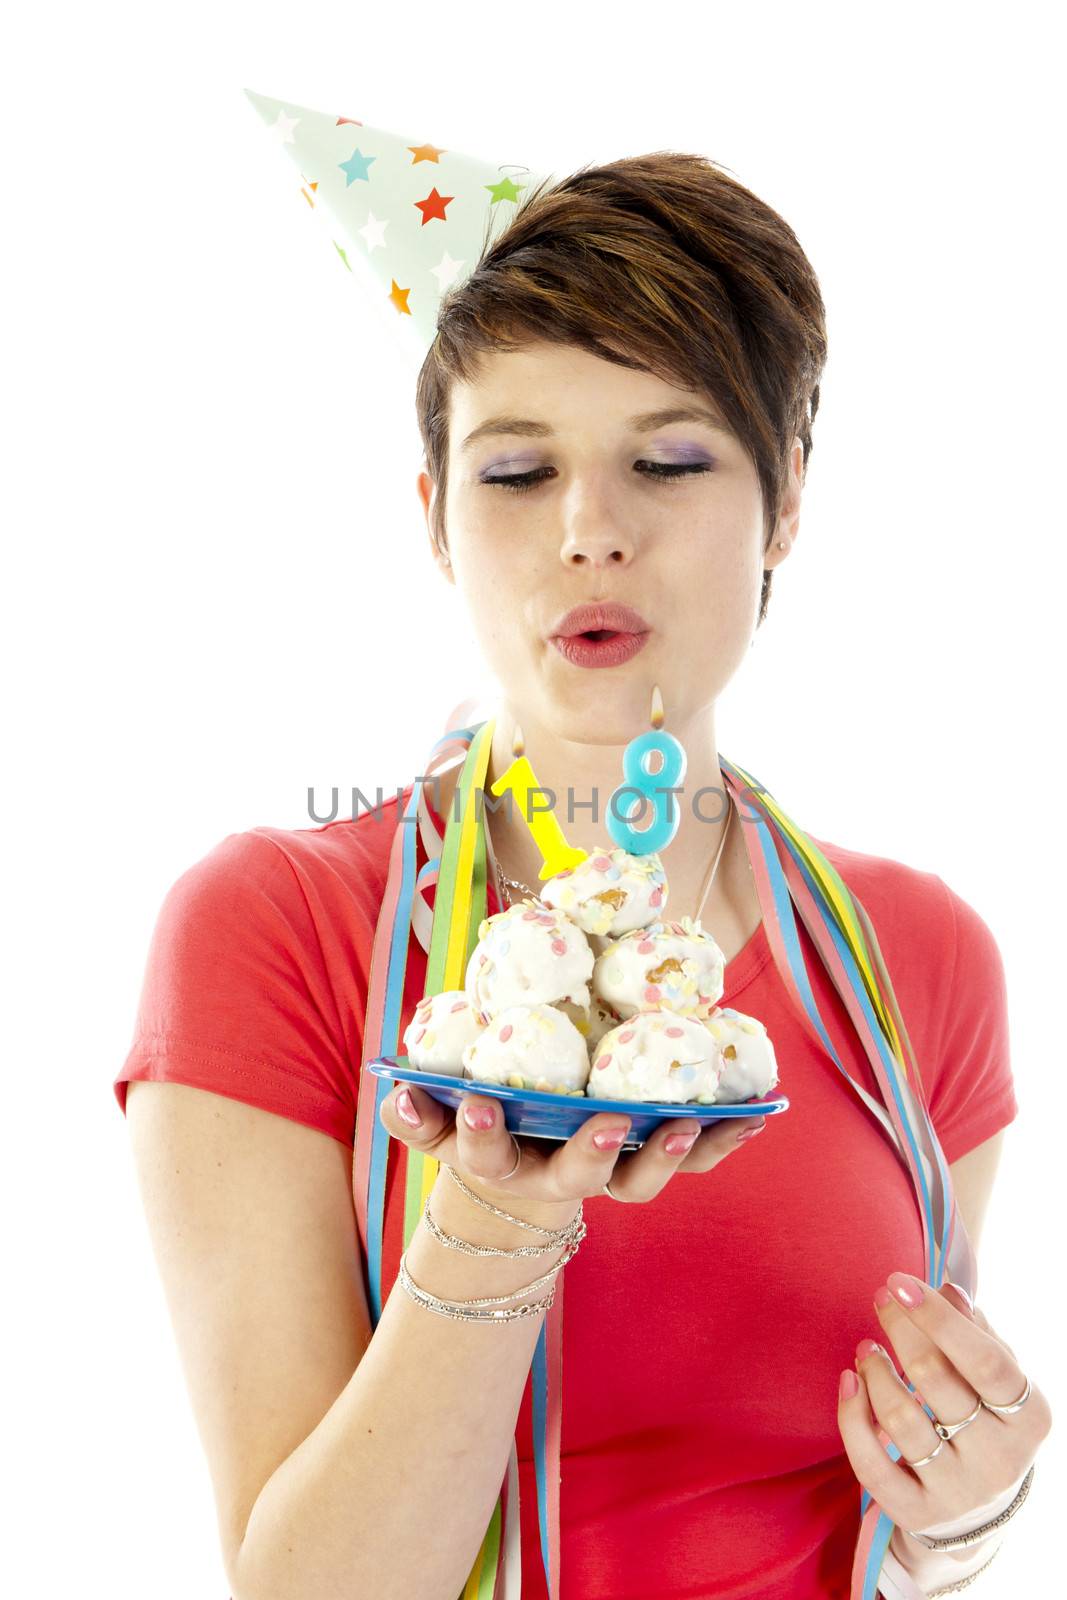 a birthday girl on her 18th birthday, holding a cake with a candle on a white background